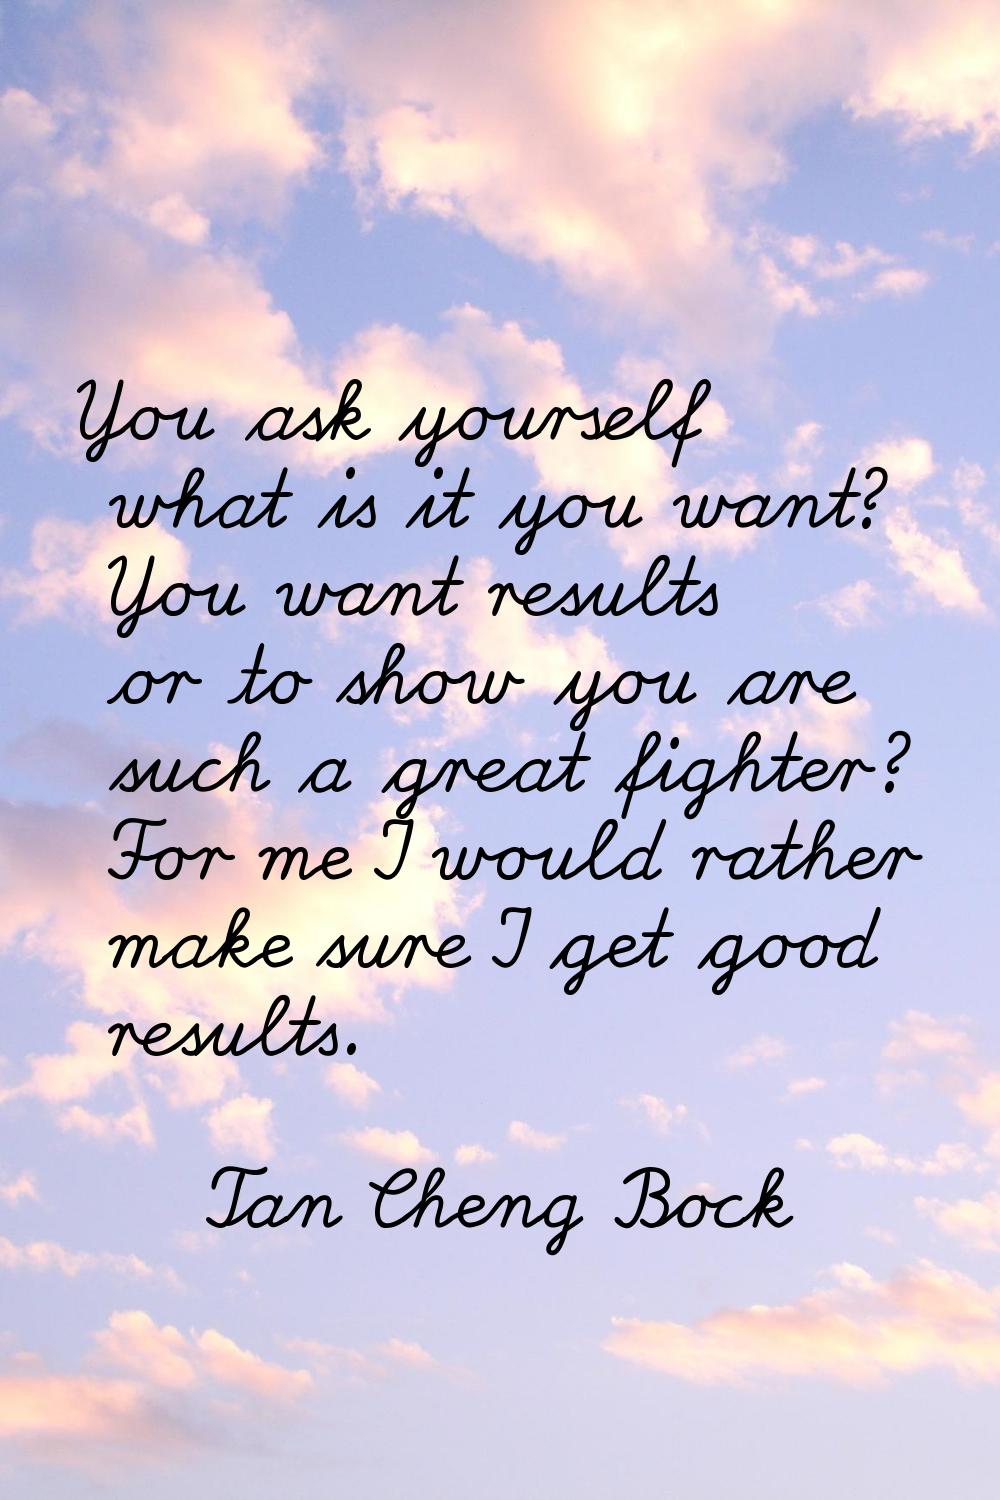 You ask yourself what is it you want? You want results or to show you are such a great fighter? For